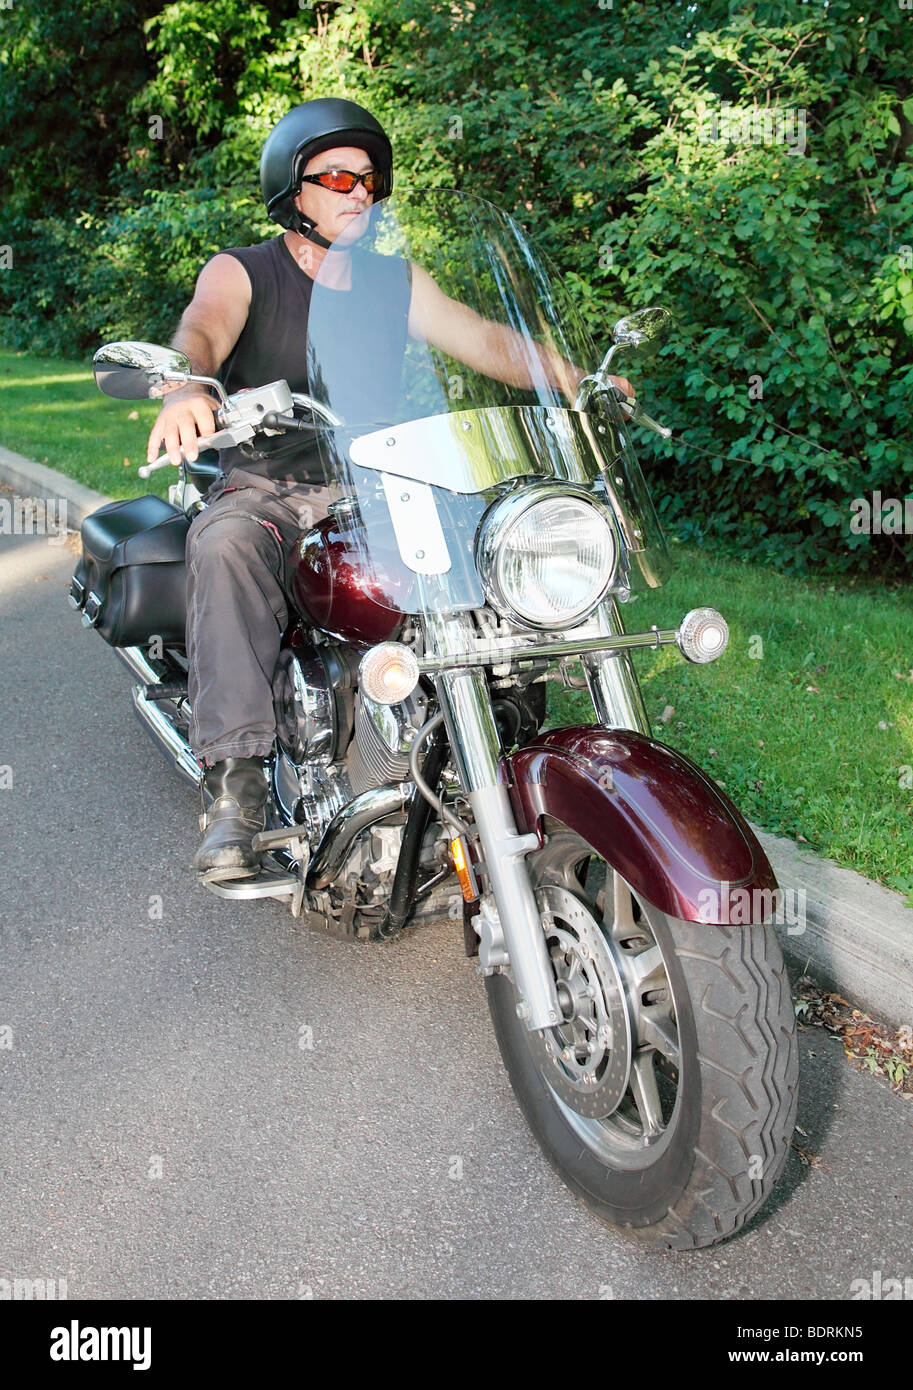 A middle-aged man is riding a motorcycle. Stock Photo